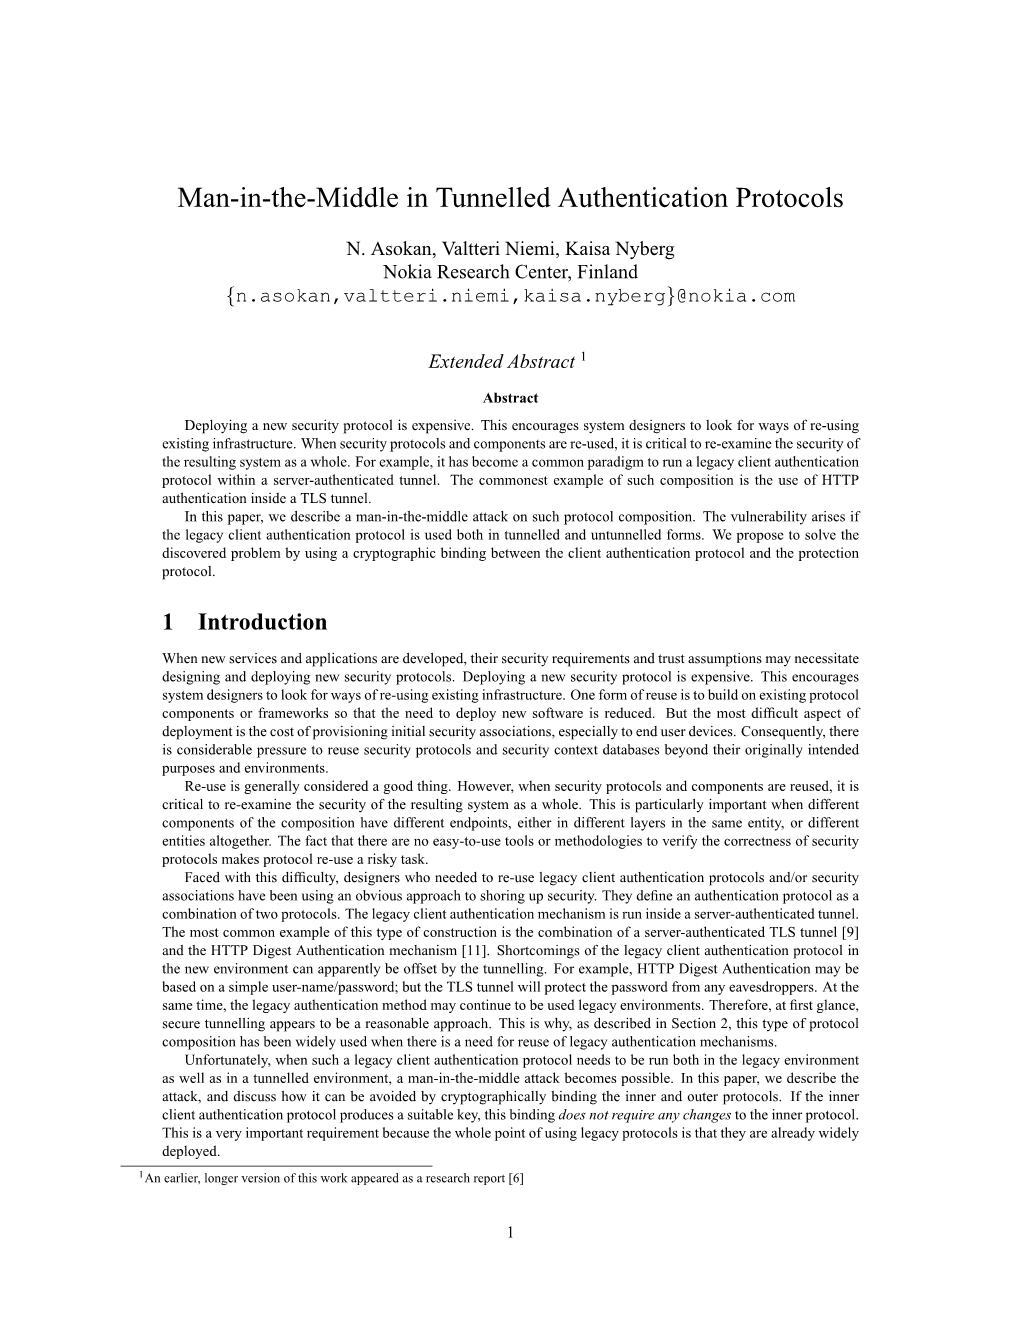 Man-In-The-Middle in Tunnelled Authentication Protocols